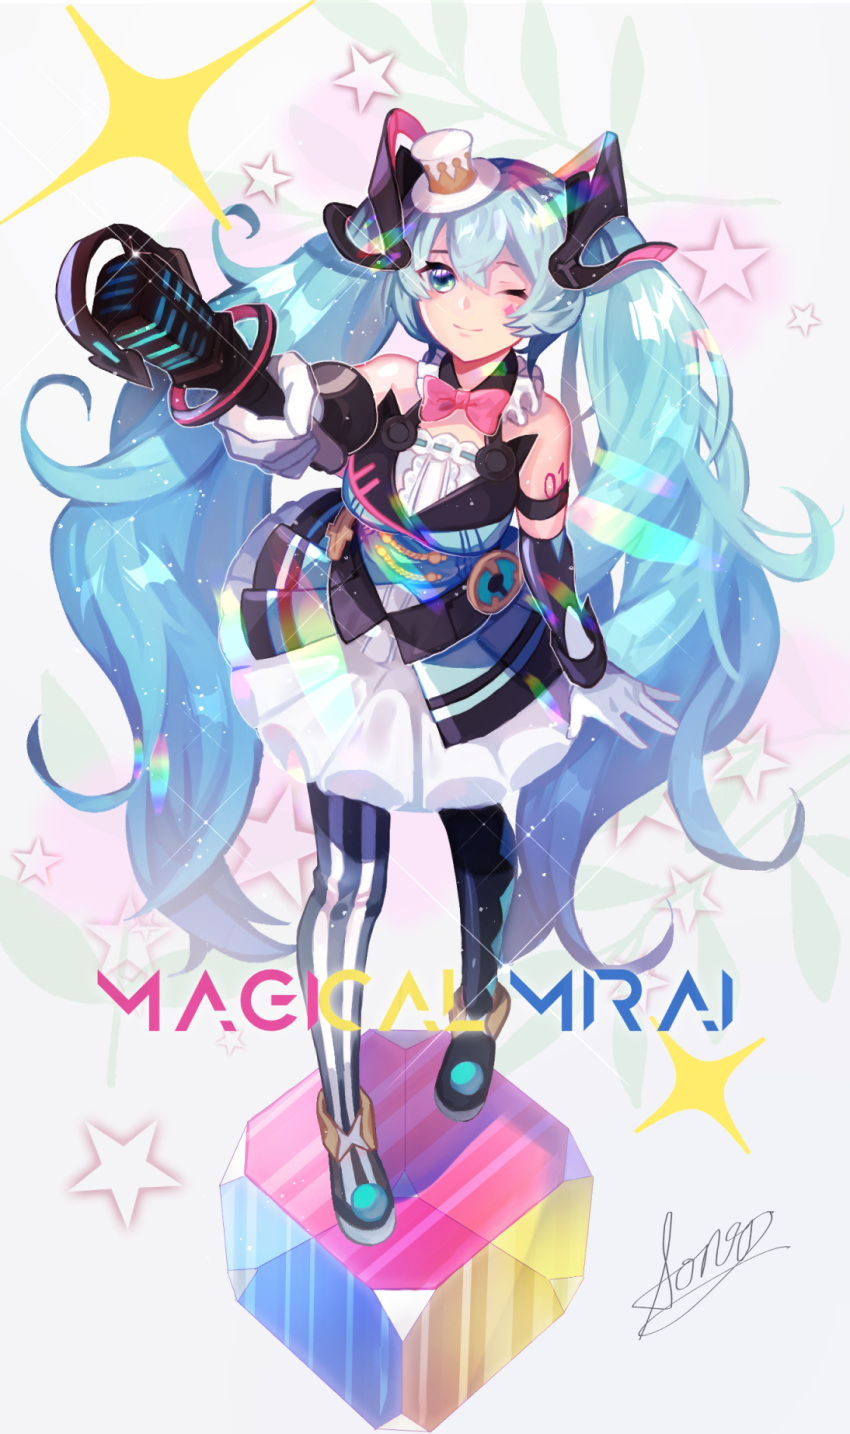 aiming_at_viewer aono_99 aqua_eyes aqua_hair argyle argyle_legwear bare_shoulders black_dress bow bowtie cube dress hair_ornament hat hatsune_miku highres holding holding_wand magical_mirai_(vocaloid) microphone_wand mini_hat mini_top_hat mismatched_legwear one_eye_closed pink_bow pleated_skirt shoulder_tattoo signature skirt smile sparkle standing_on_object star starry_background striped striped_legwear tattoo thigh-highs top_hat vocaloid wand white_headwear